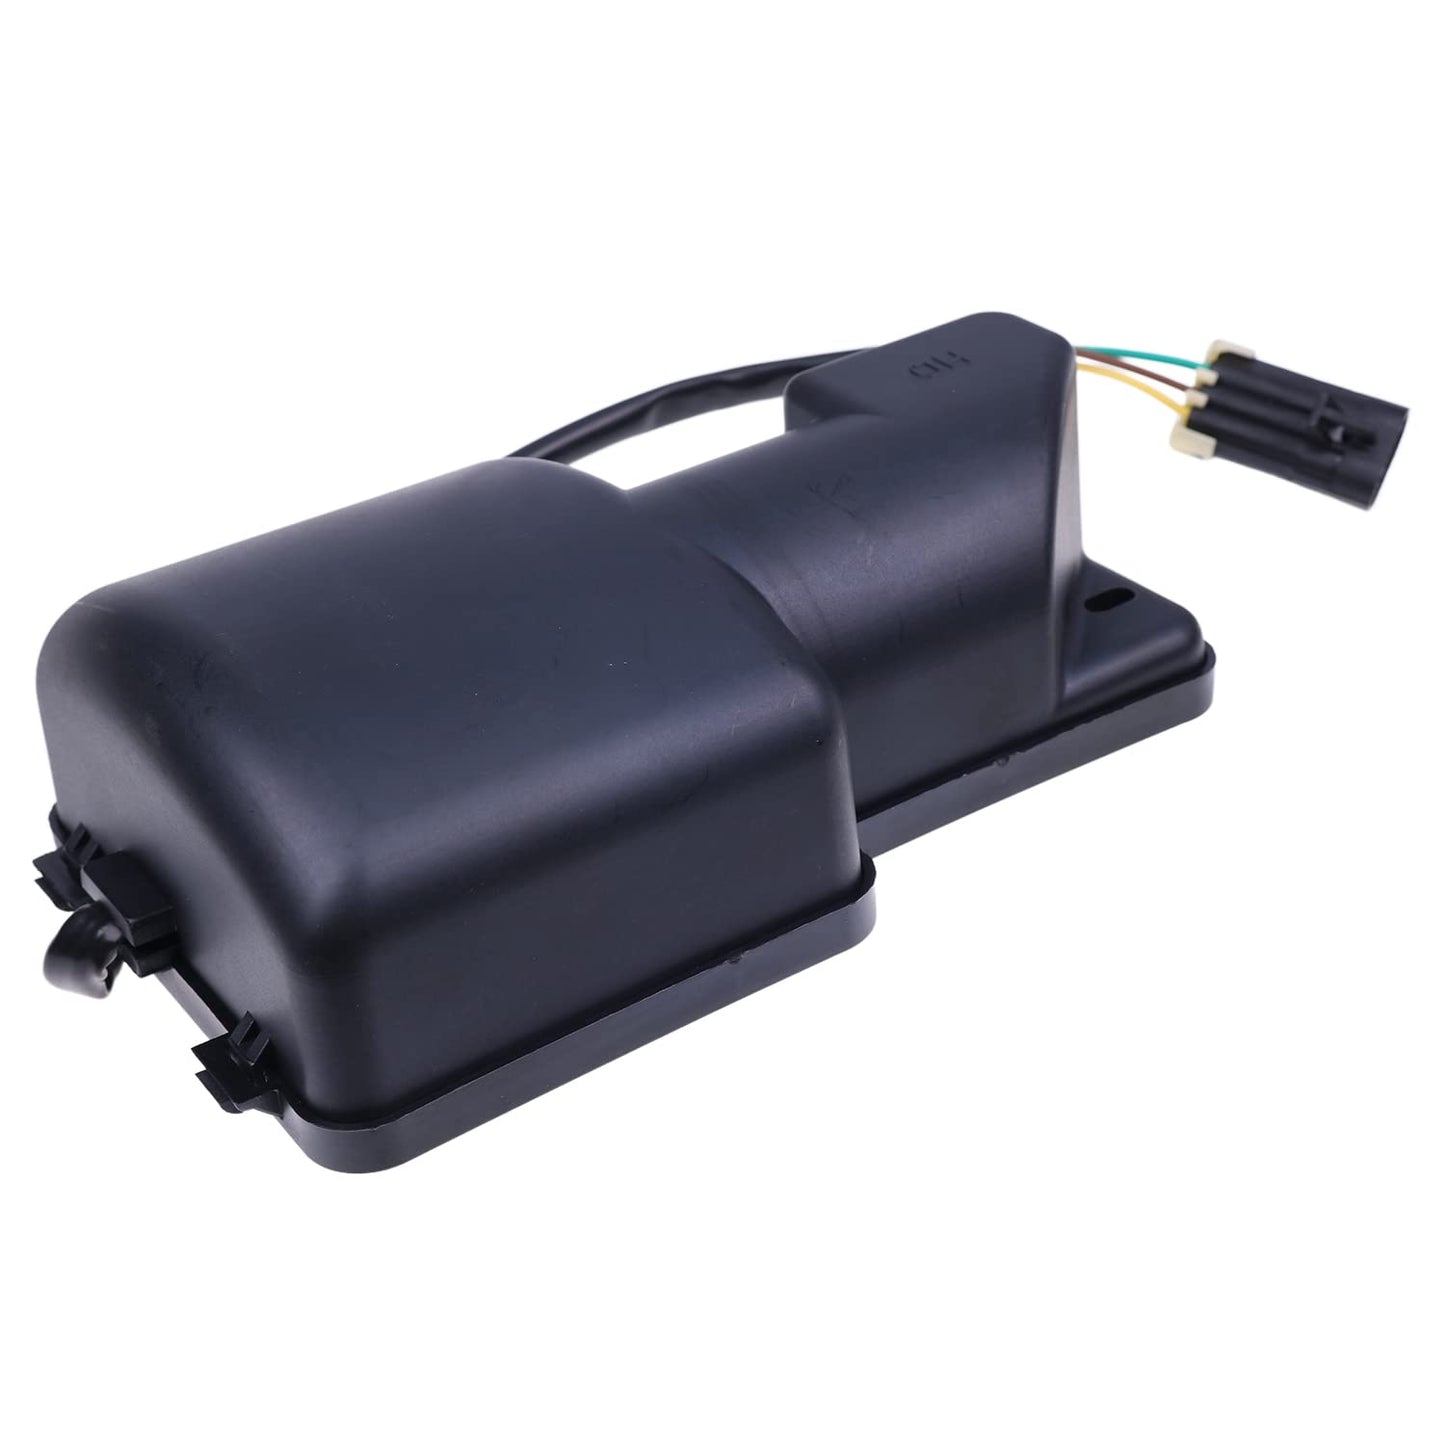 New 6679476 Wiper Motor Compatible with Bobcat S100 S130 S150 T190 T200 T300 963 7753 A250 Skid Steer Loader